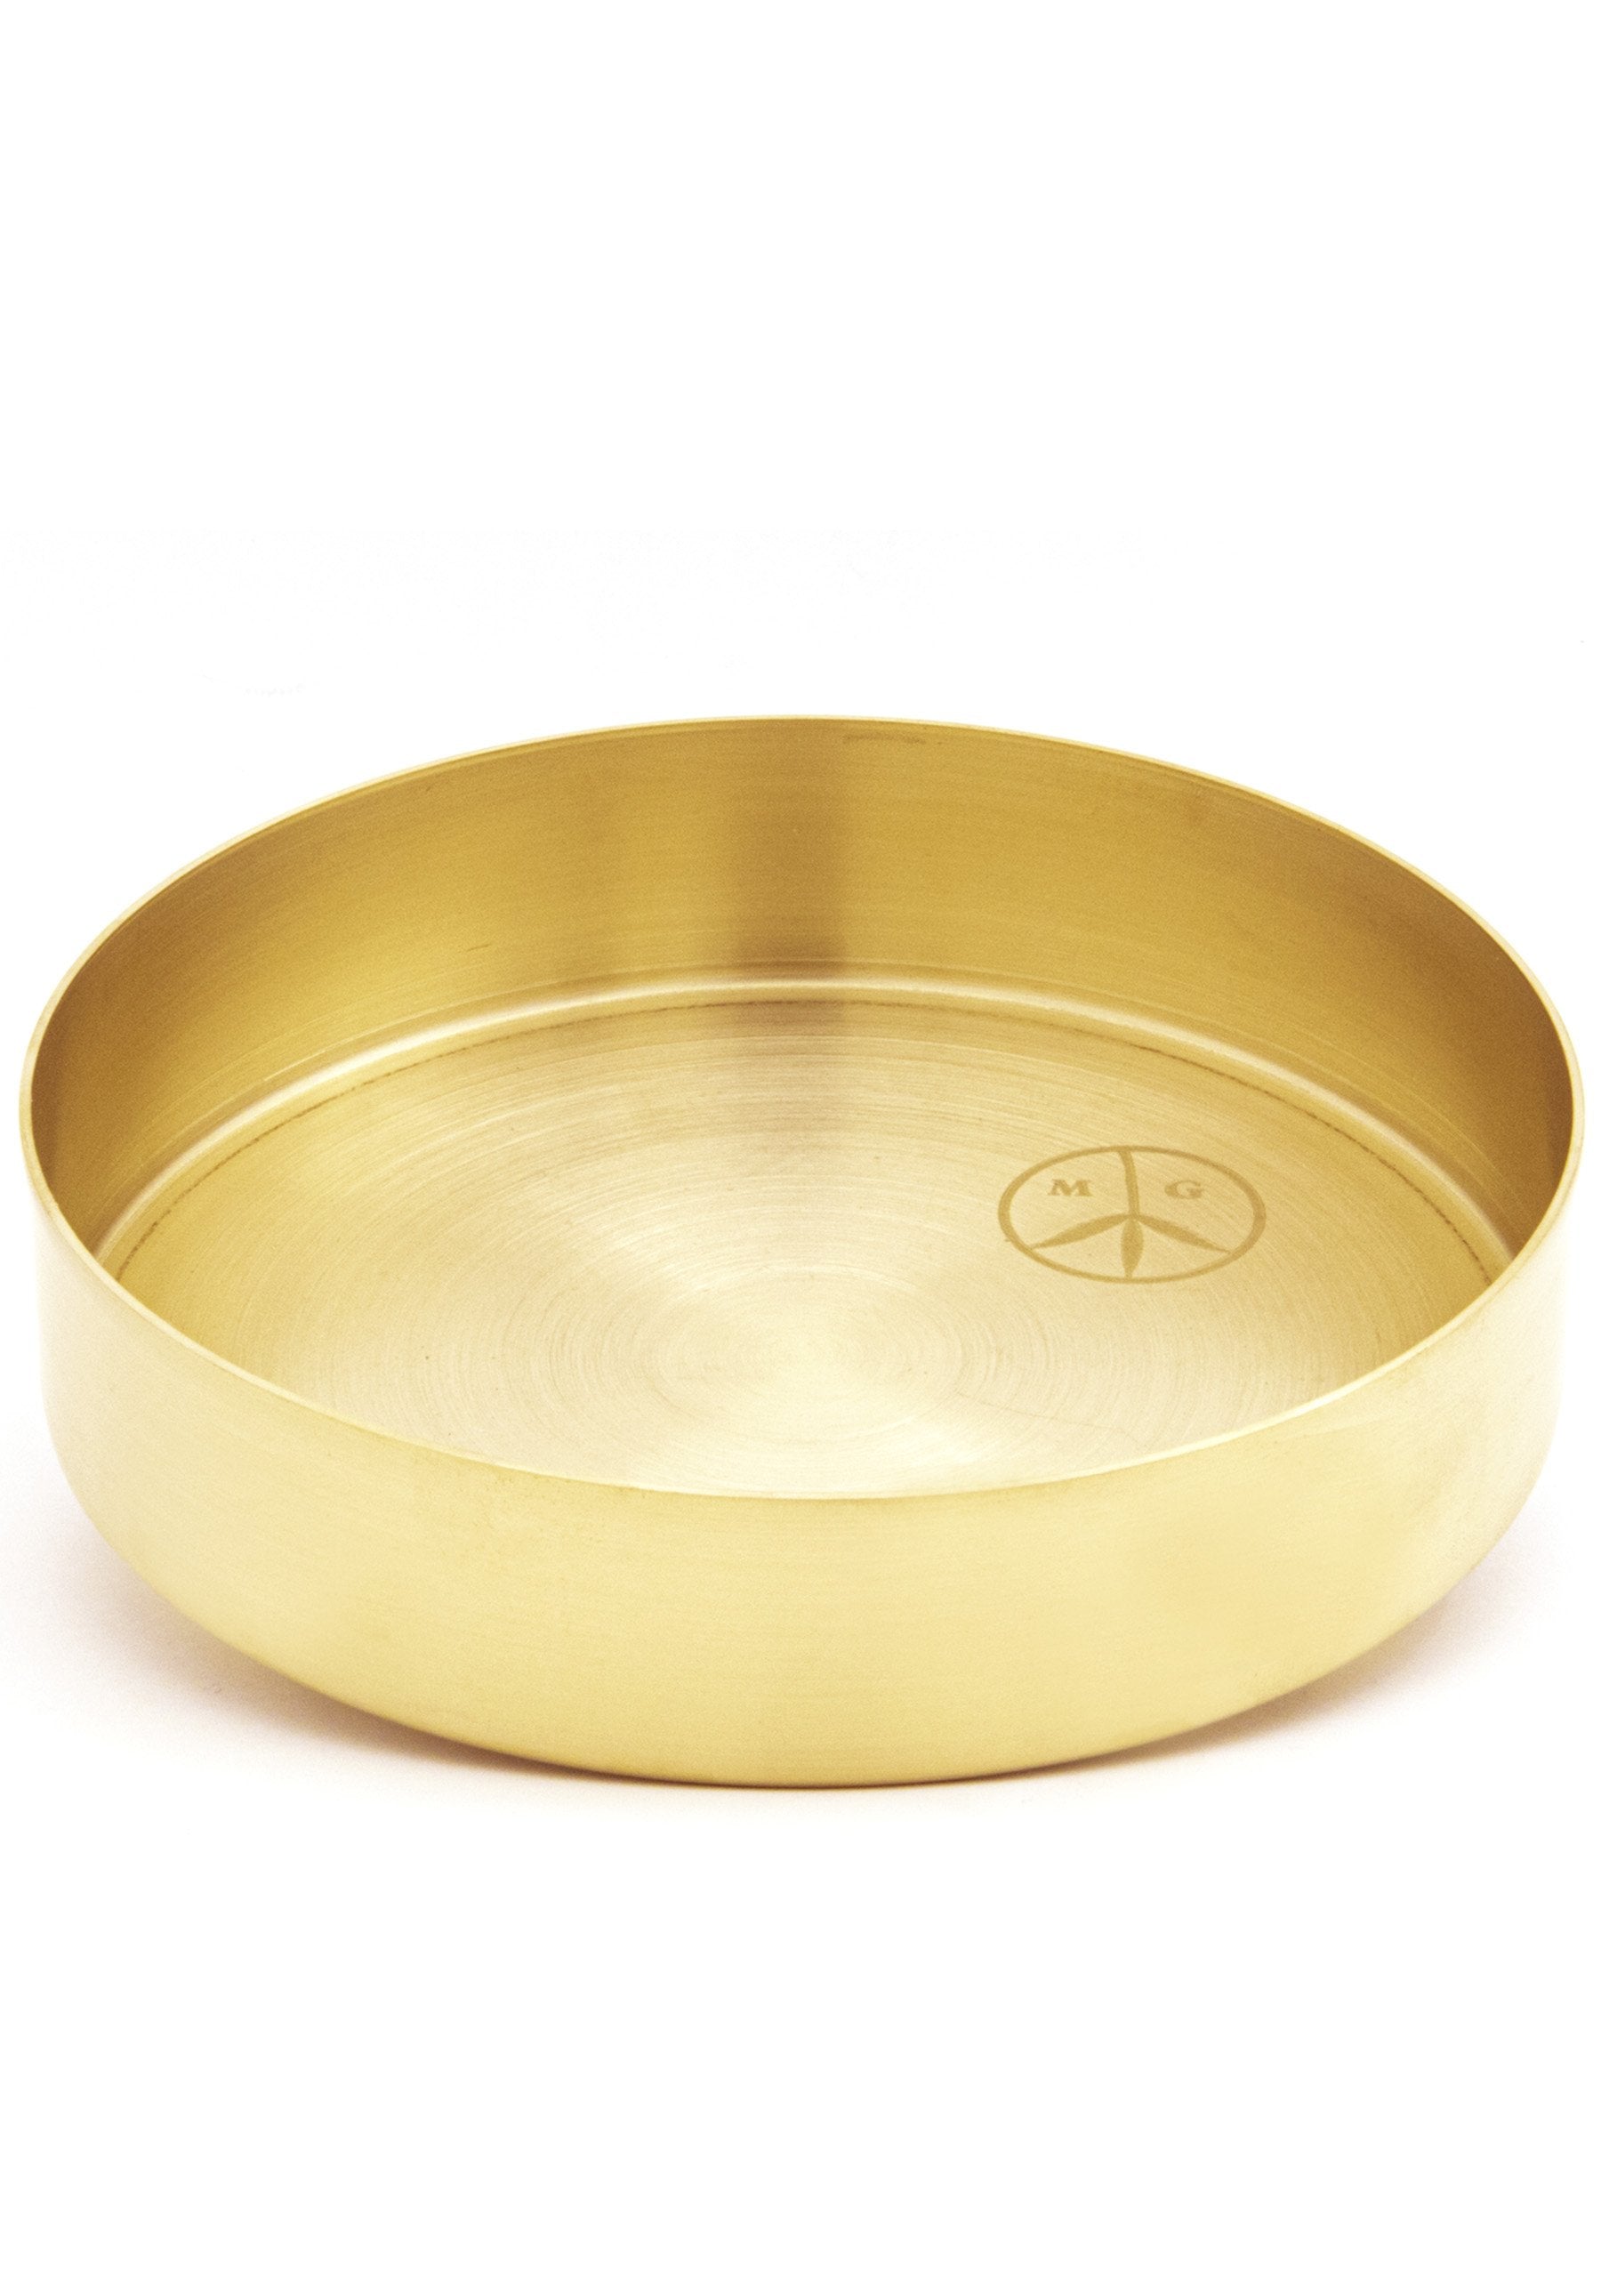 Circle Peace Tray - Brass-Mister Green-Mister Green